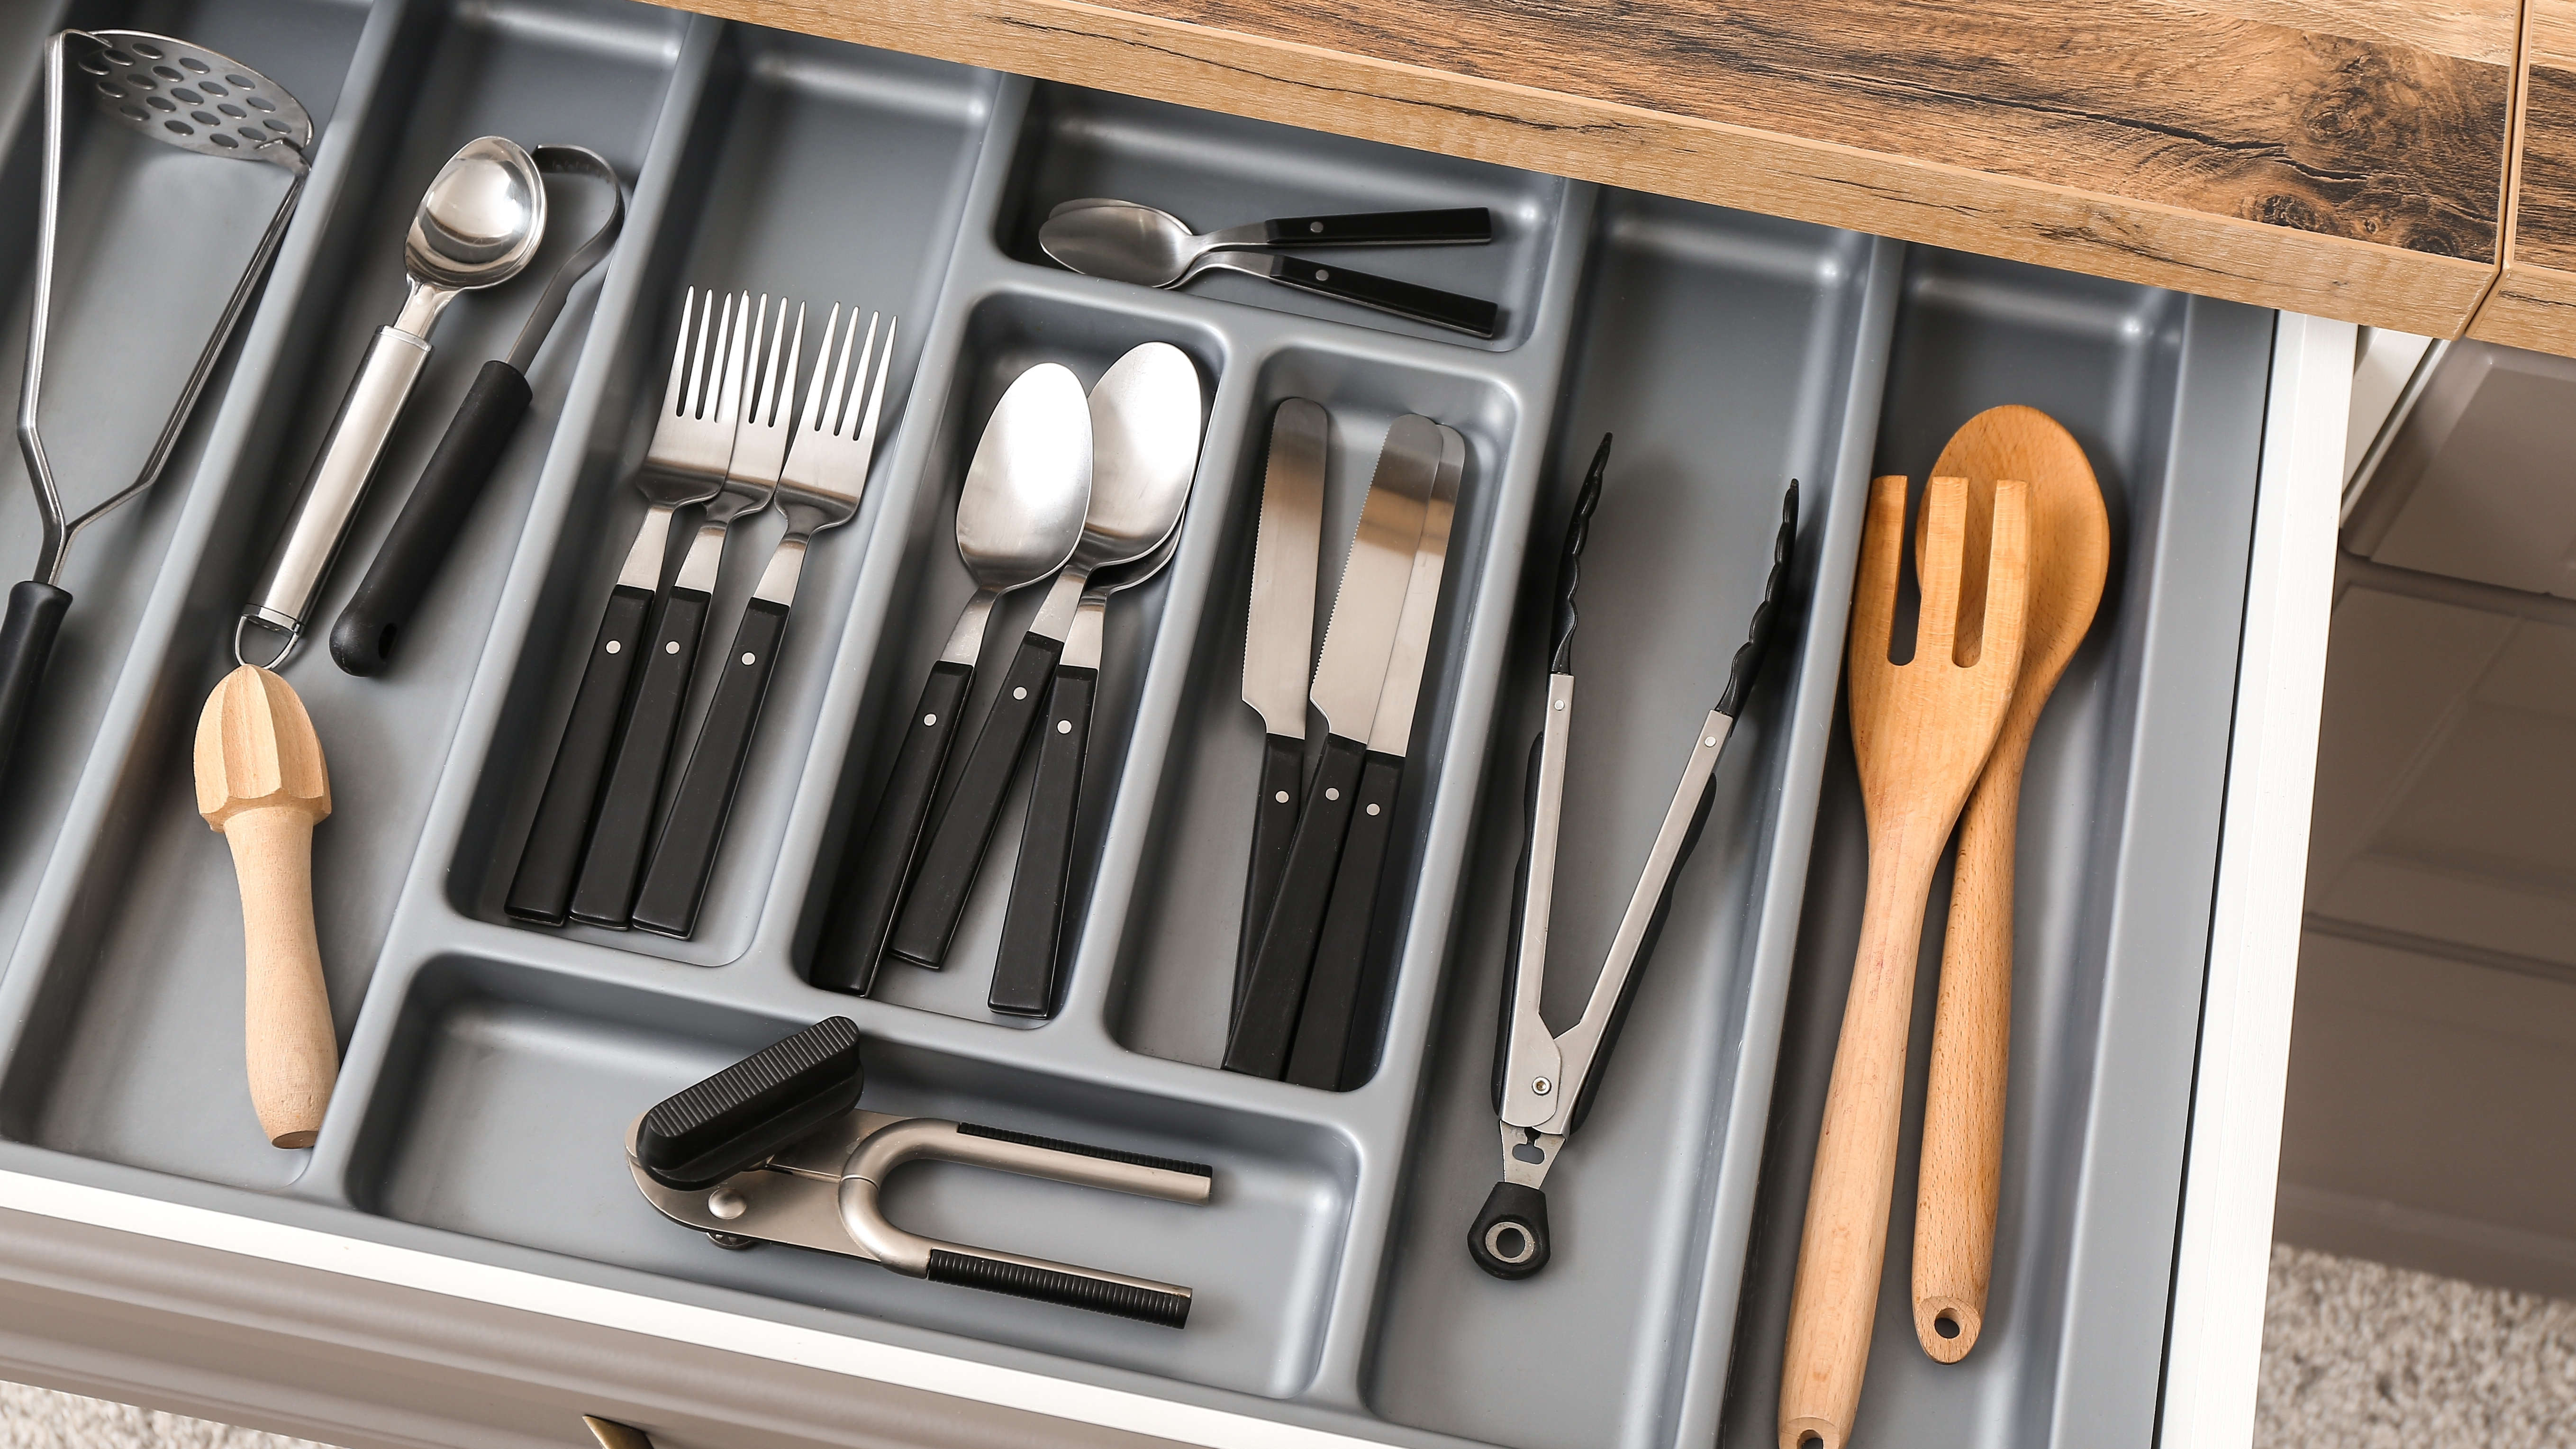 7 ways to declutter your kitchen like a minimalist | Tom's Guide